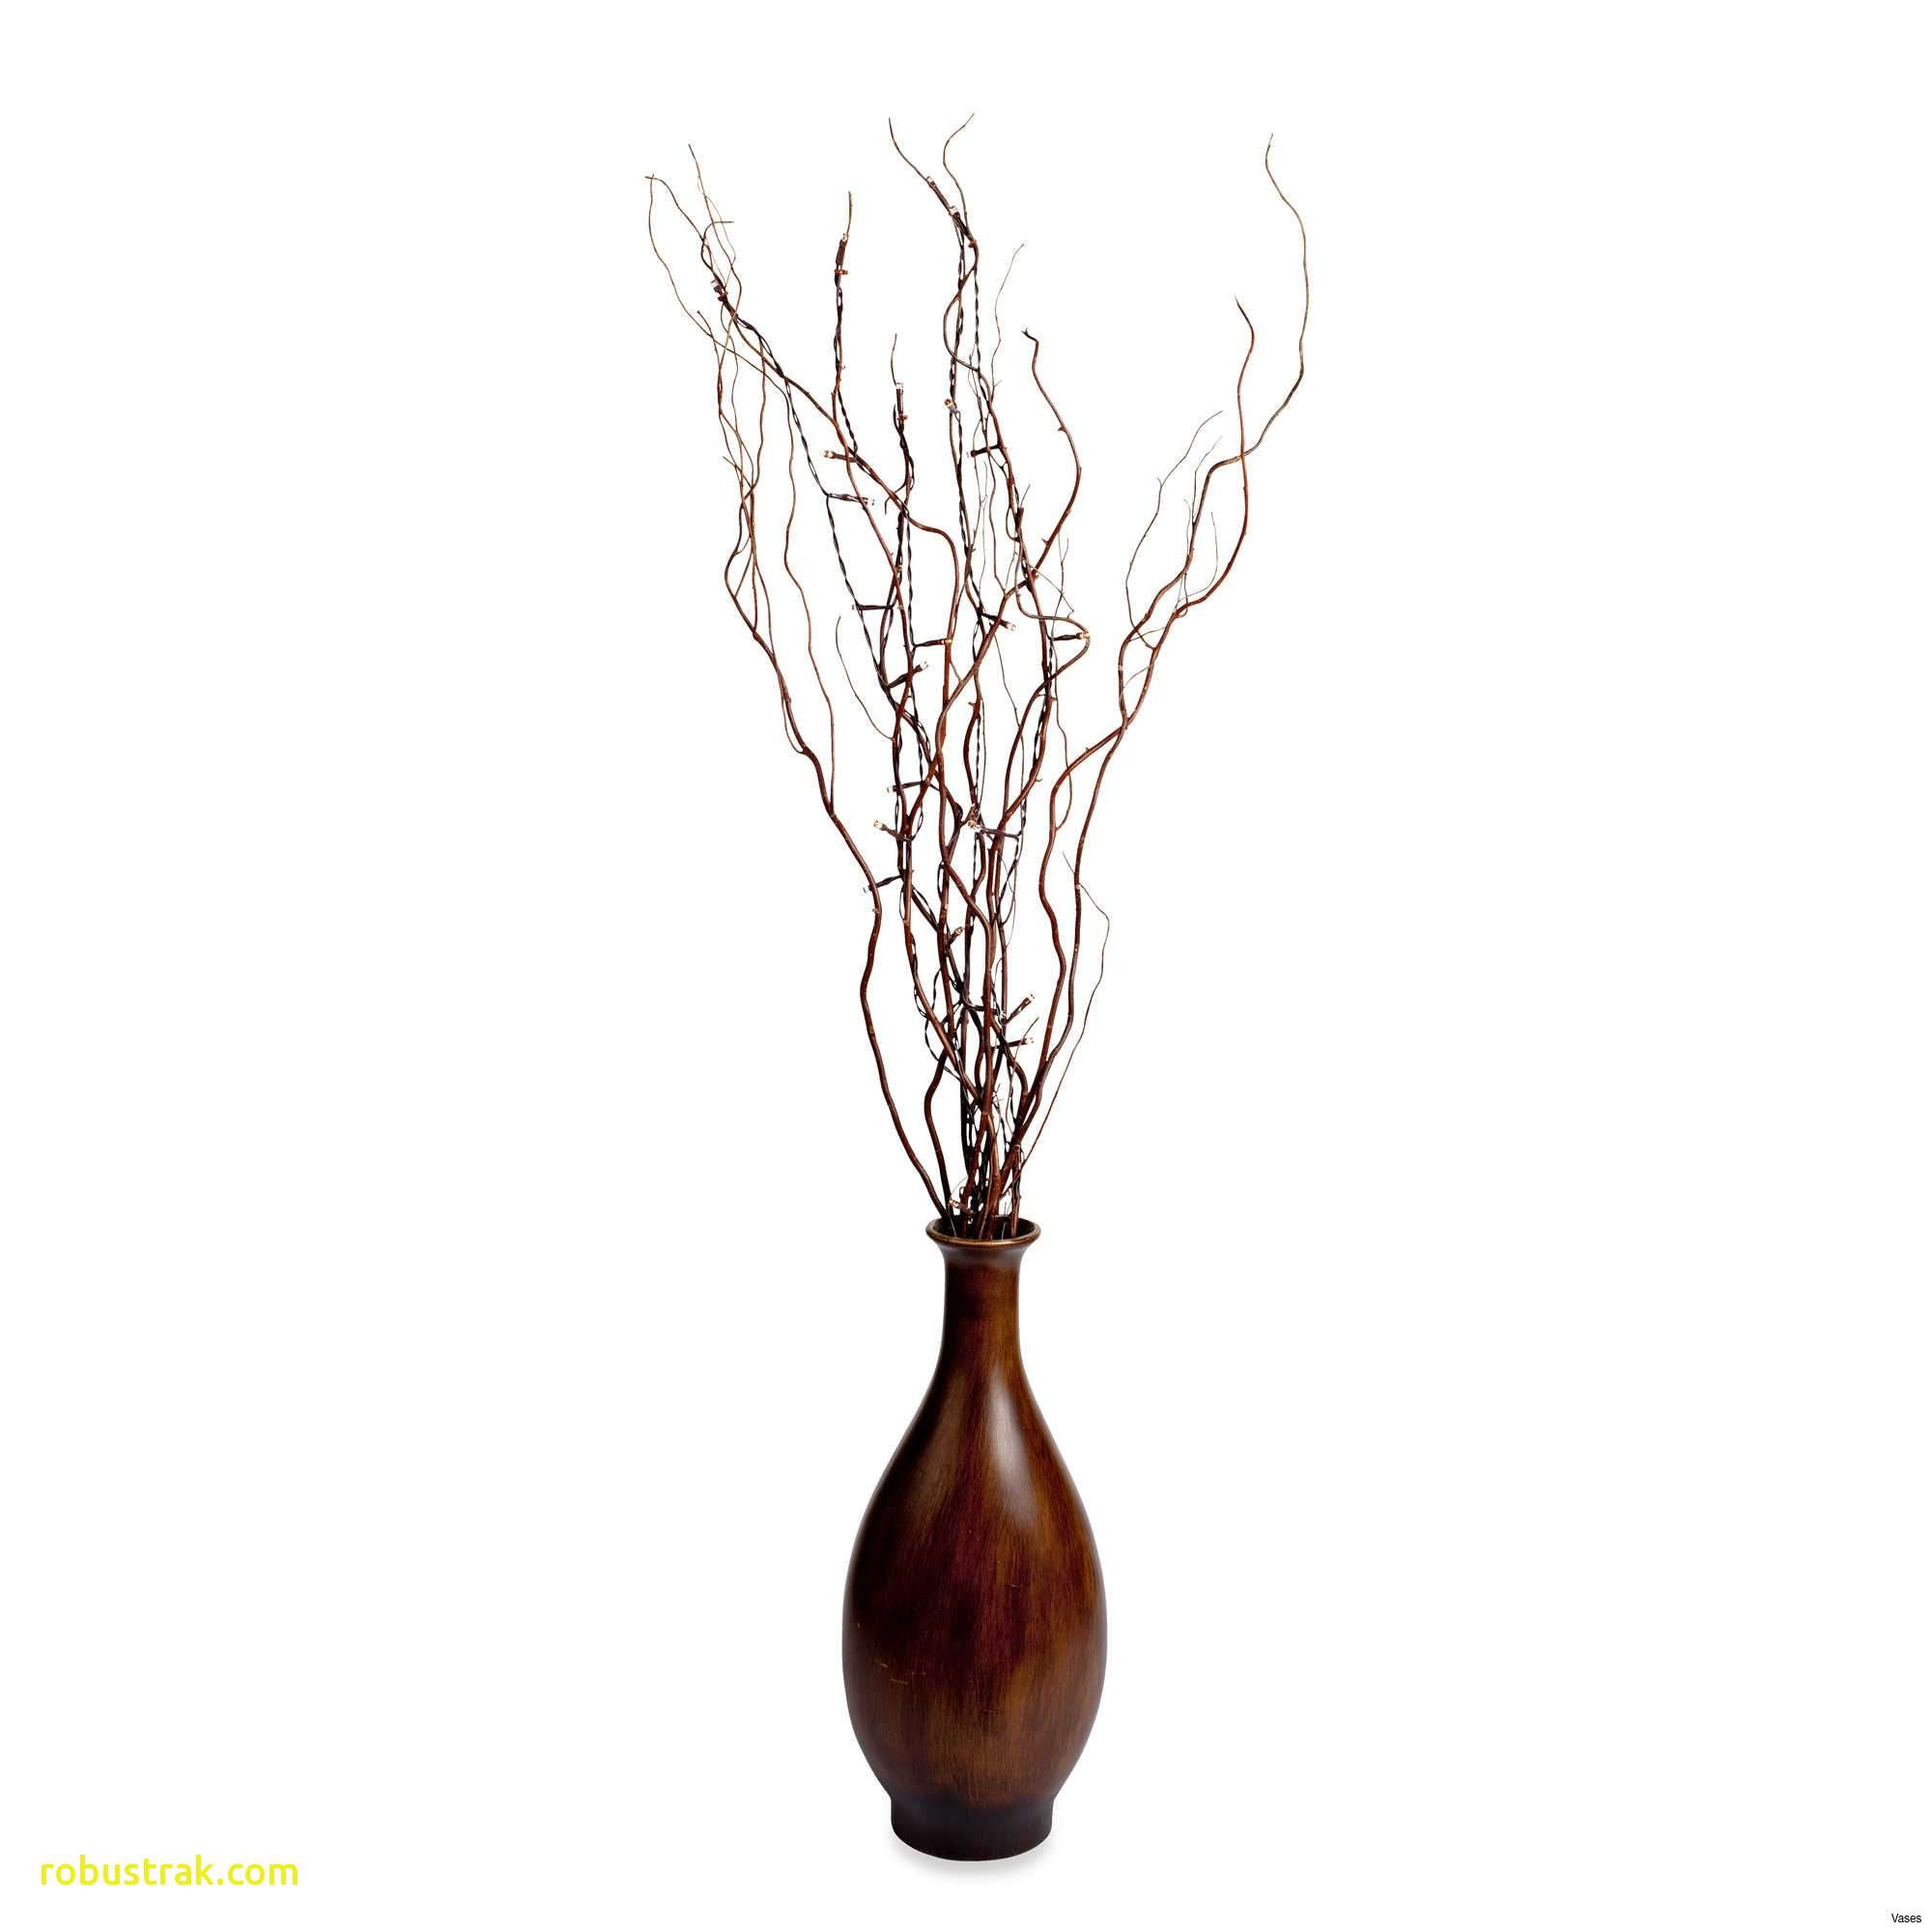 21 Famous Glass Floor Vase Ideas 2024 free download glass floor vase ideas of inspirational decor sticks in a vase home design ideas regarding brown lighted branches matched with home accessories ideas vase sticks luxury standing tableh vases